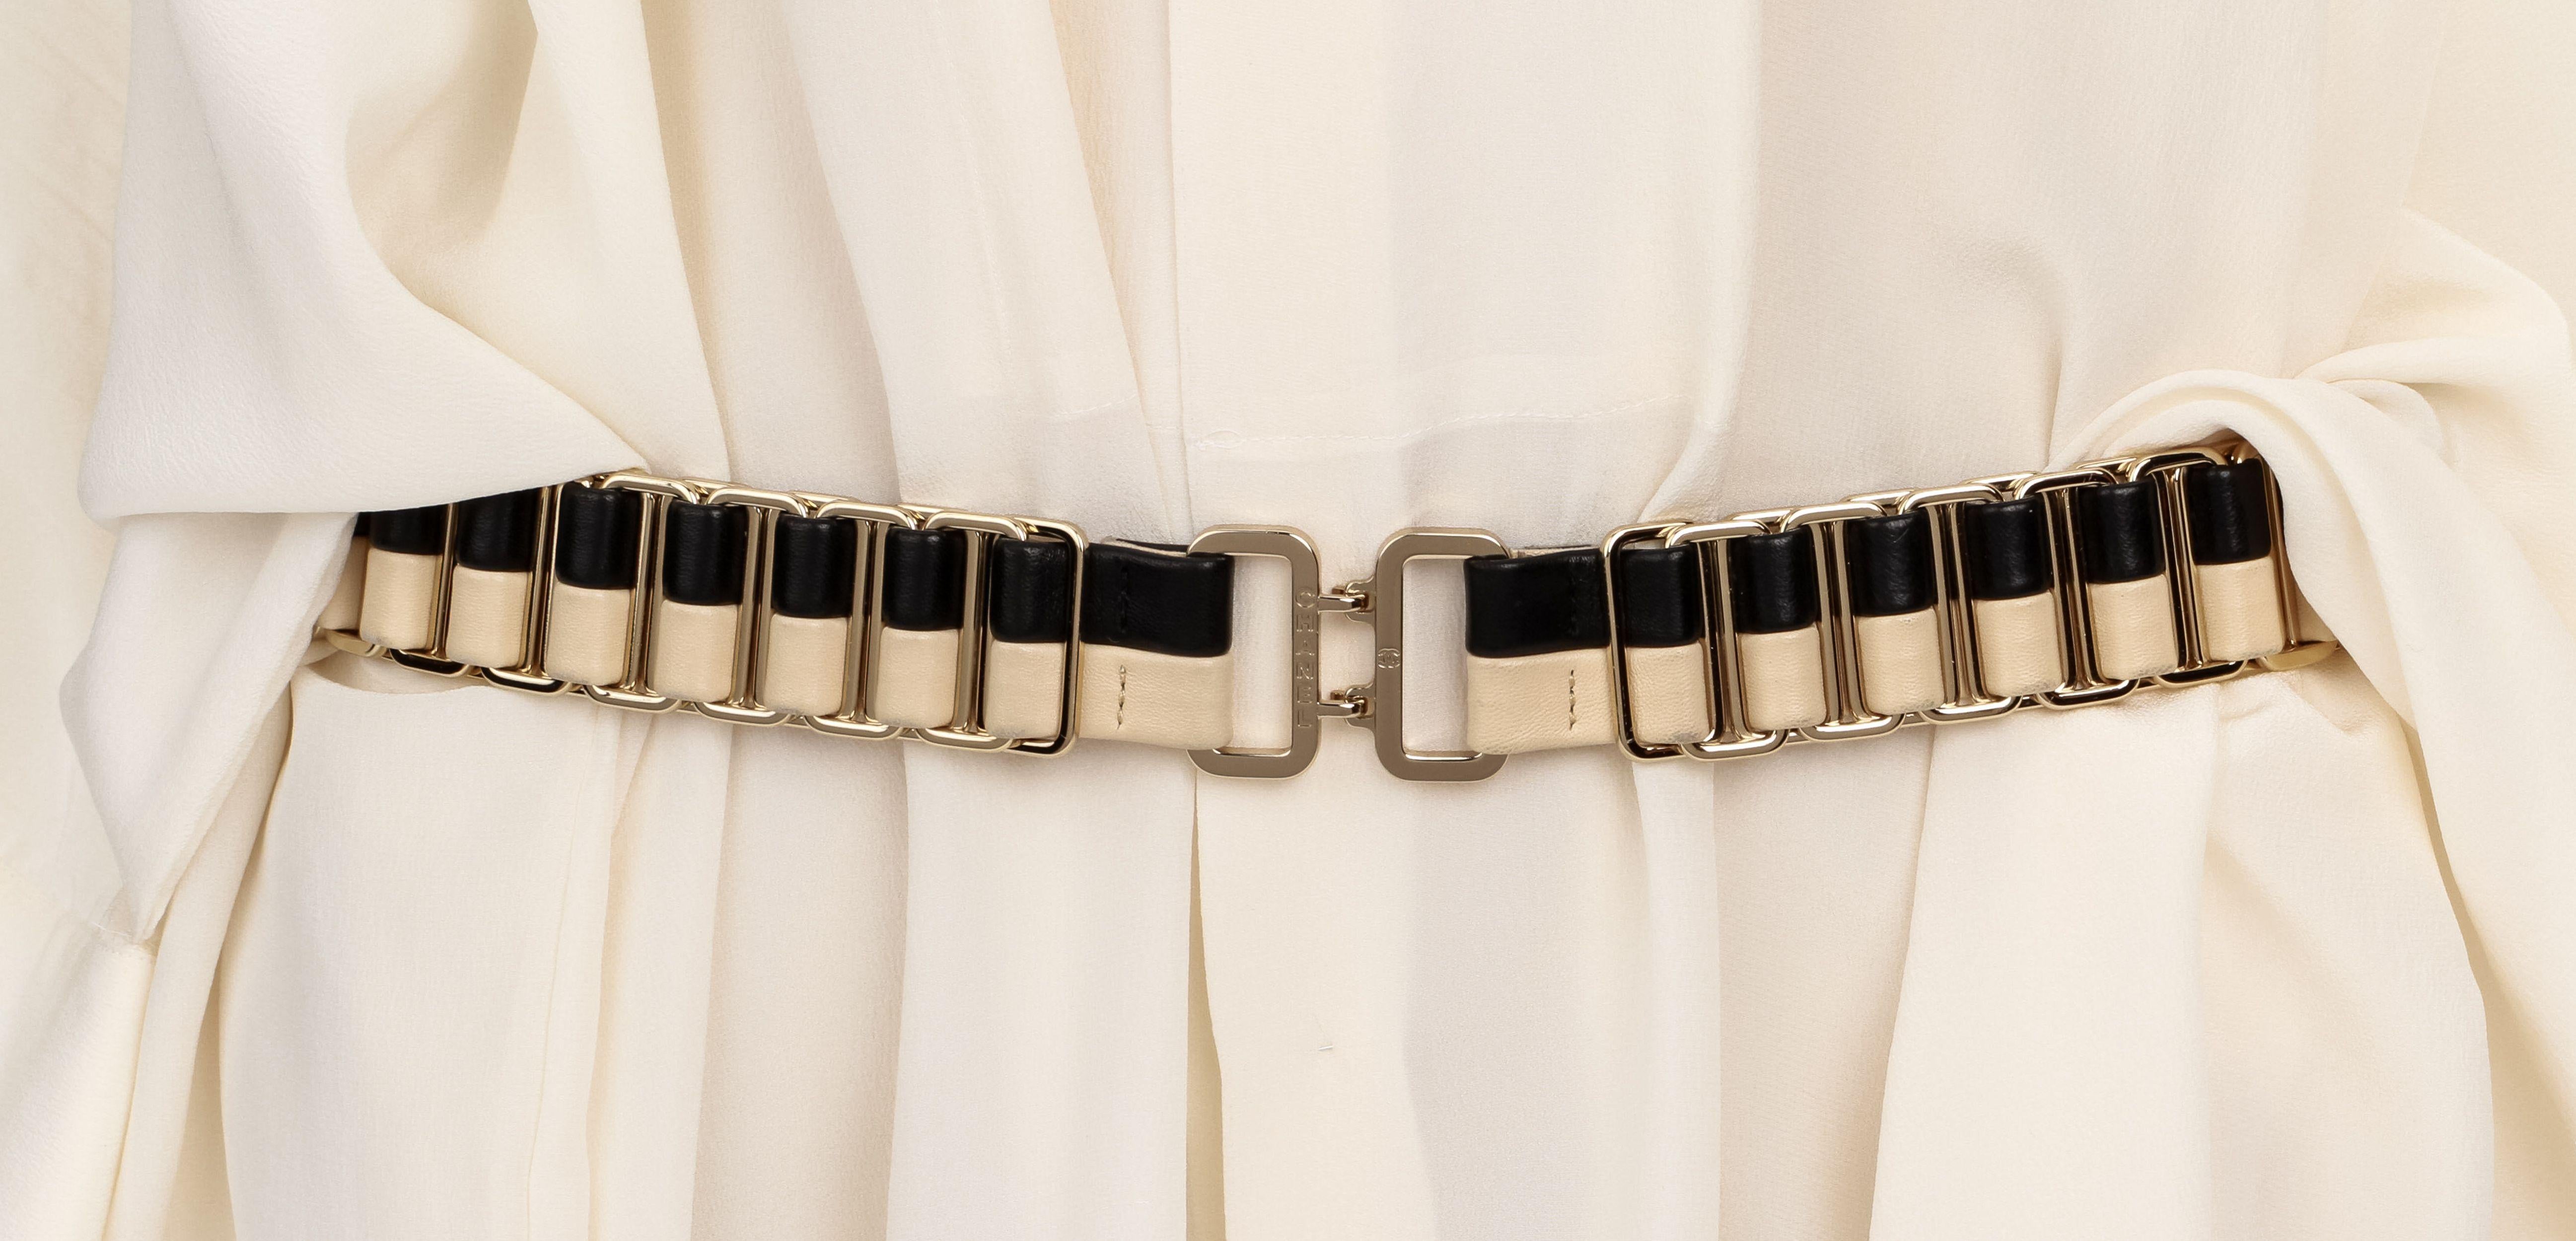 Cruise 2005 black and beige belt with light gold hardware. 85cm/34”. Large size. Comes with original dust cover.